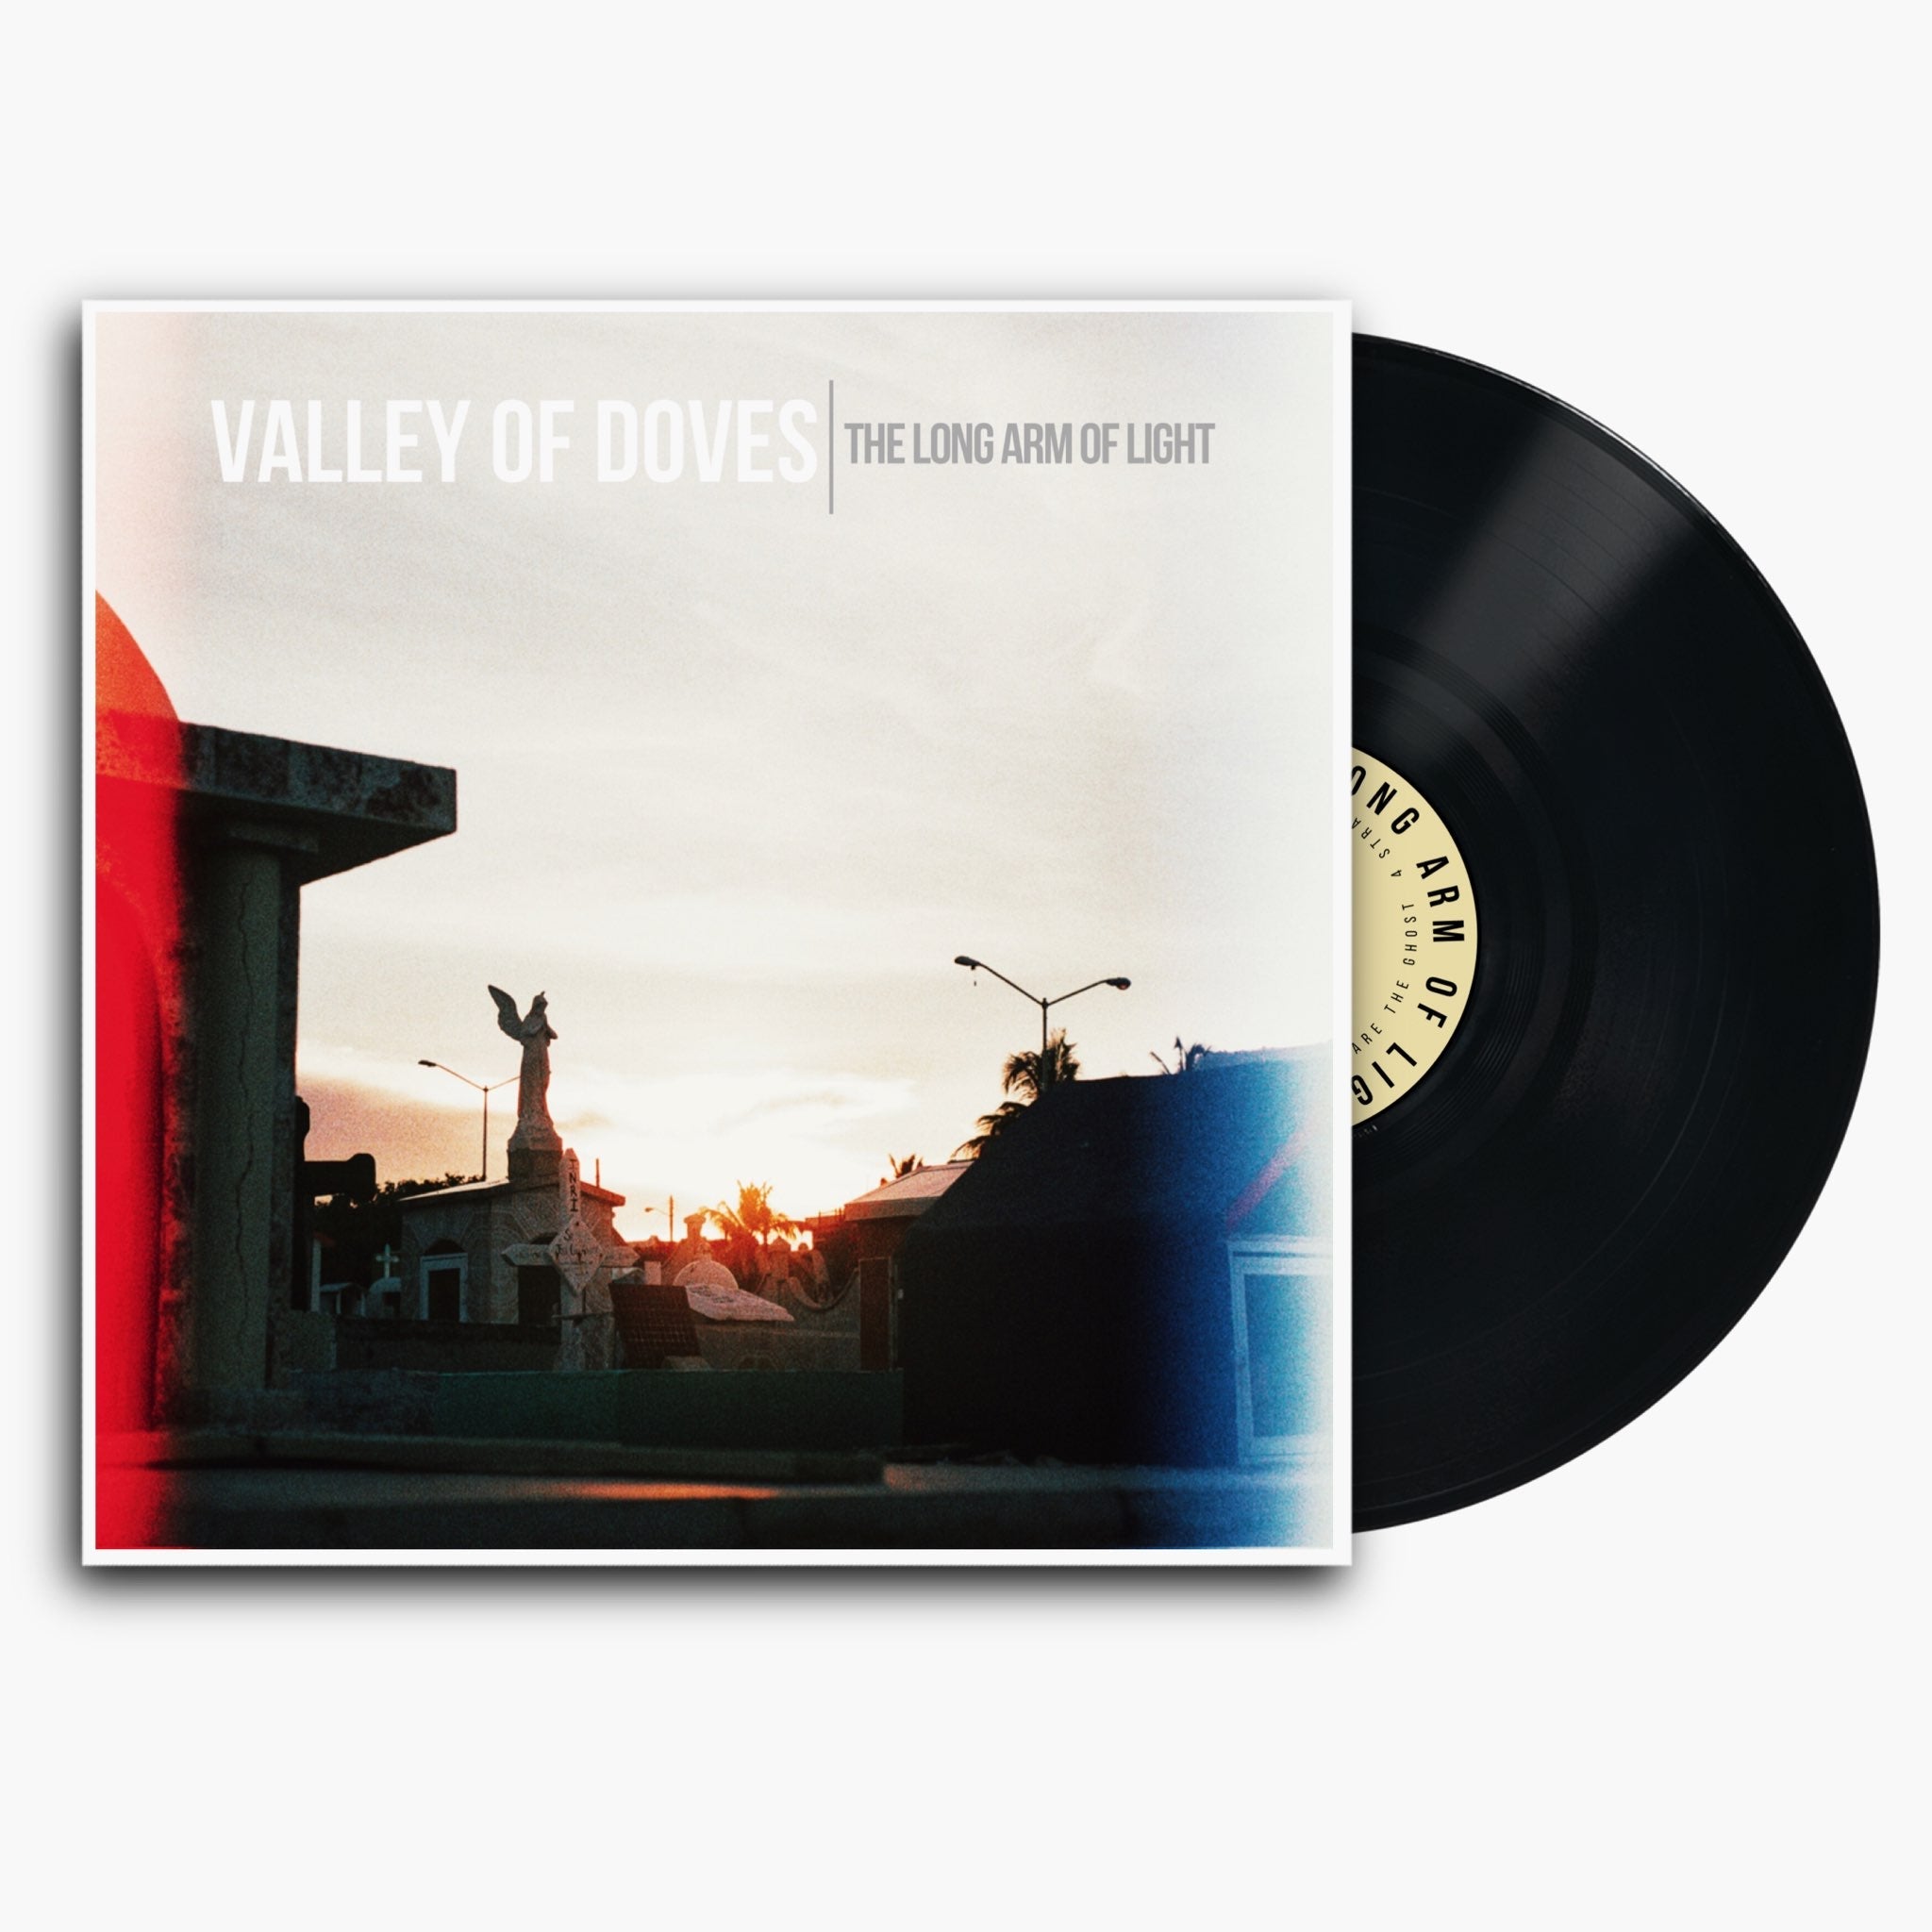 Valley of Doves: The Long Arm of Light: Steadfast Exclusive 180g Black Vinyl LP - Steadfast Records